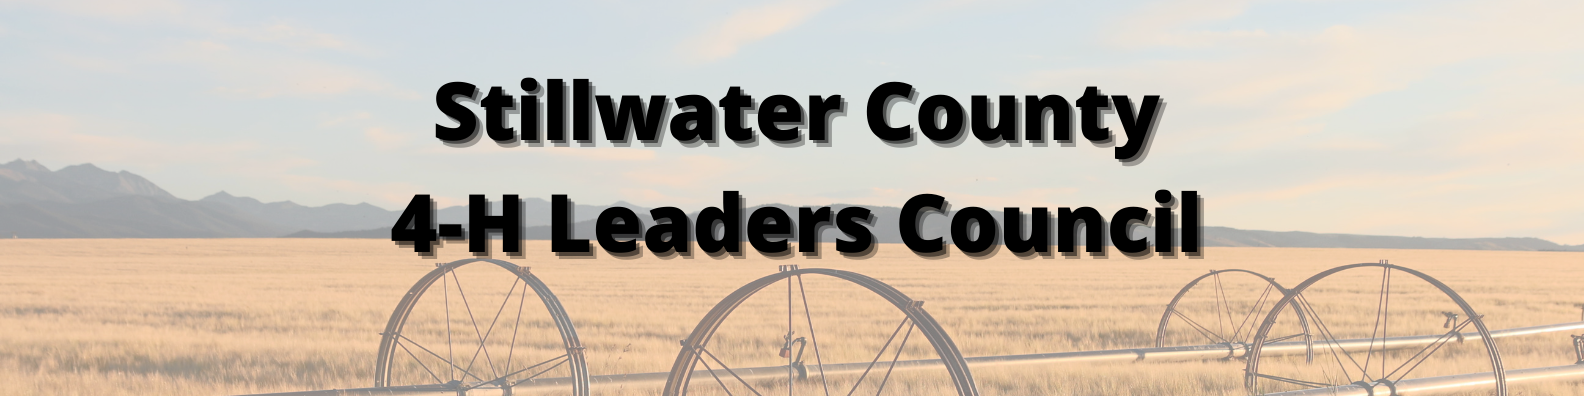 Stilllwater County 4-H Council Leaders